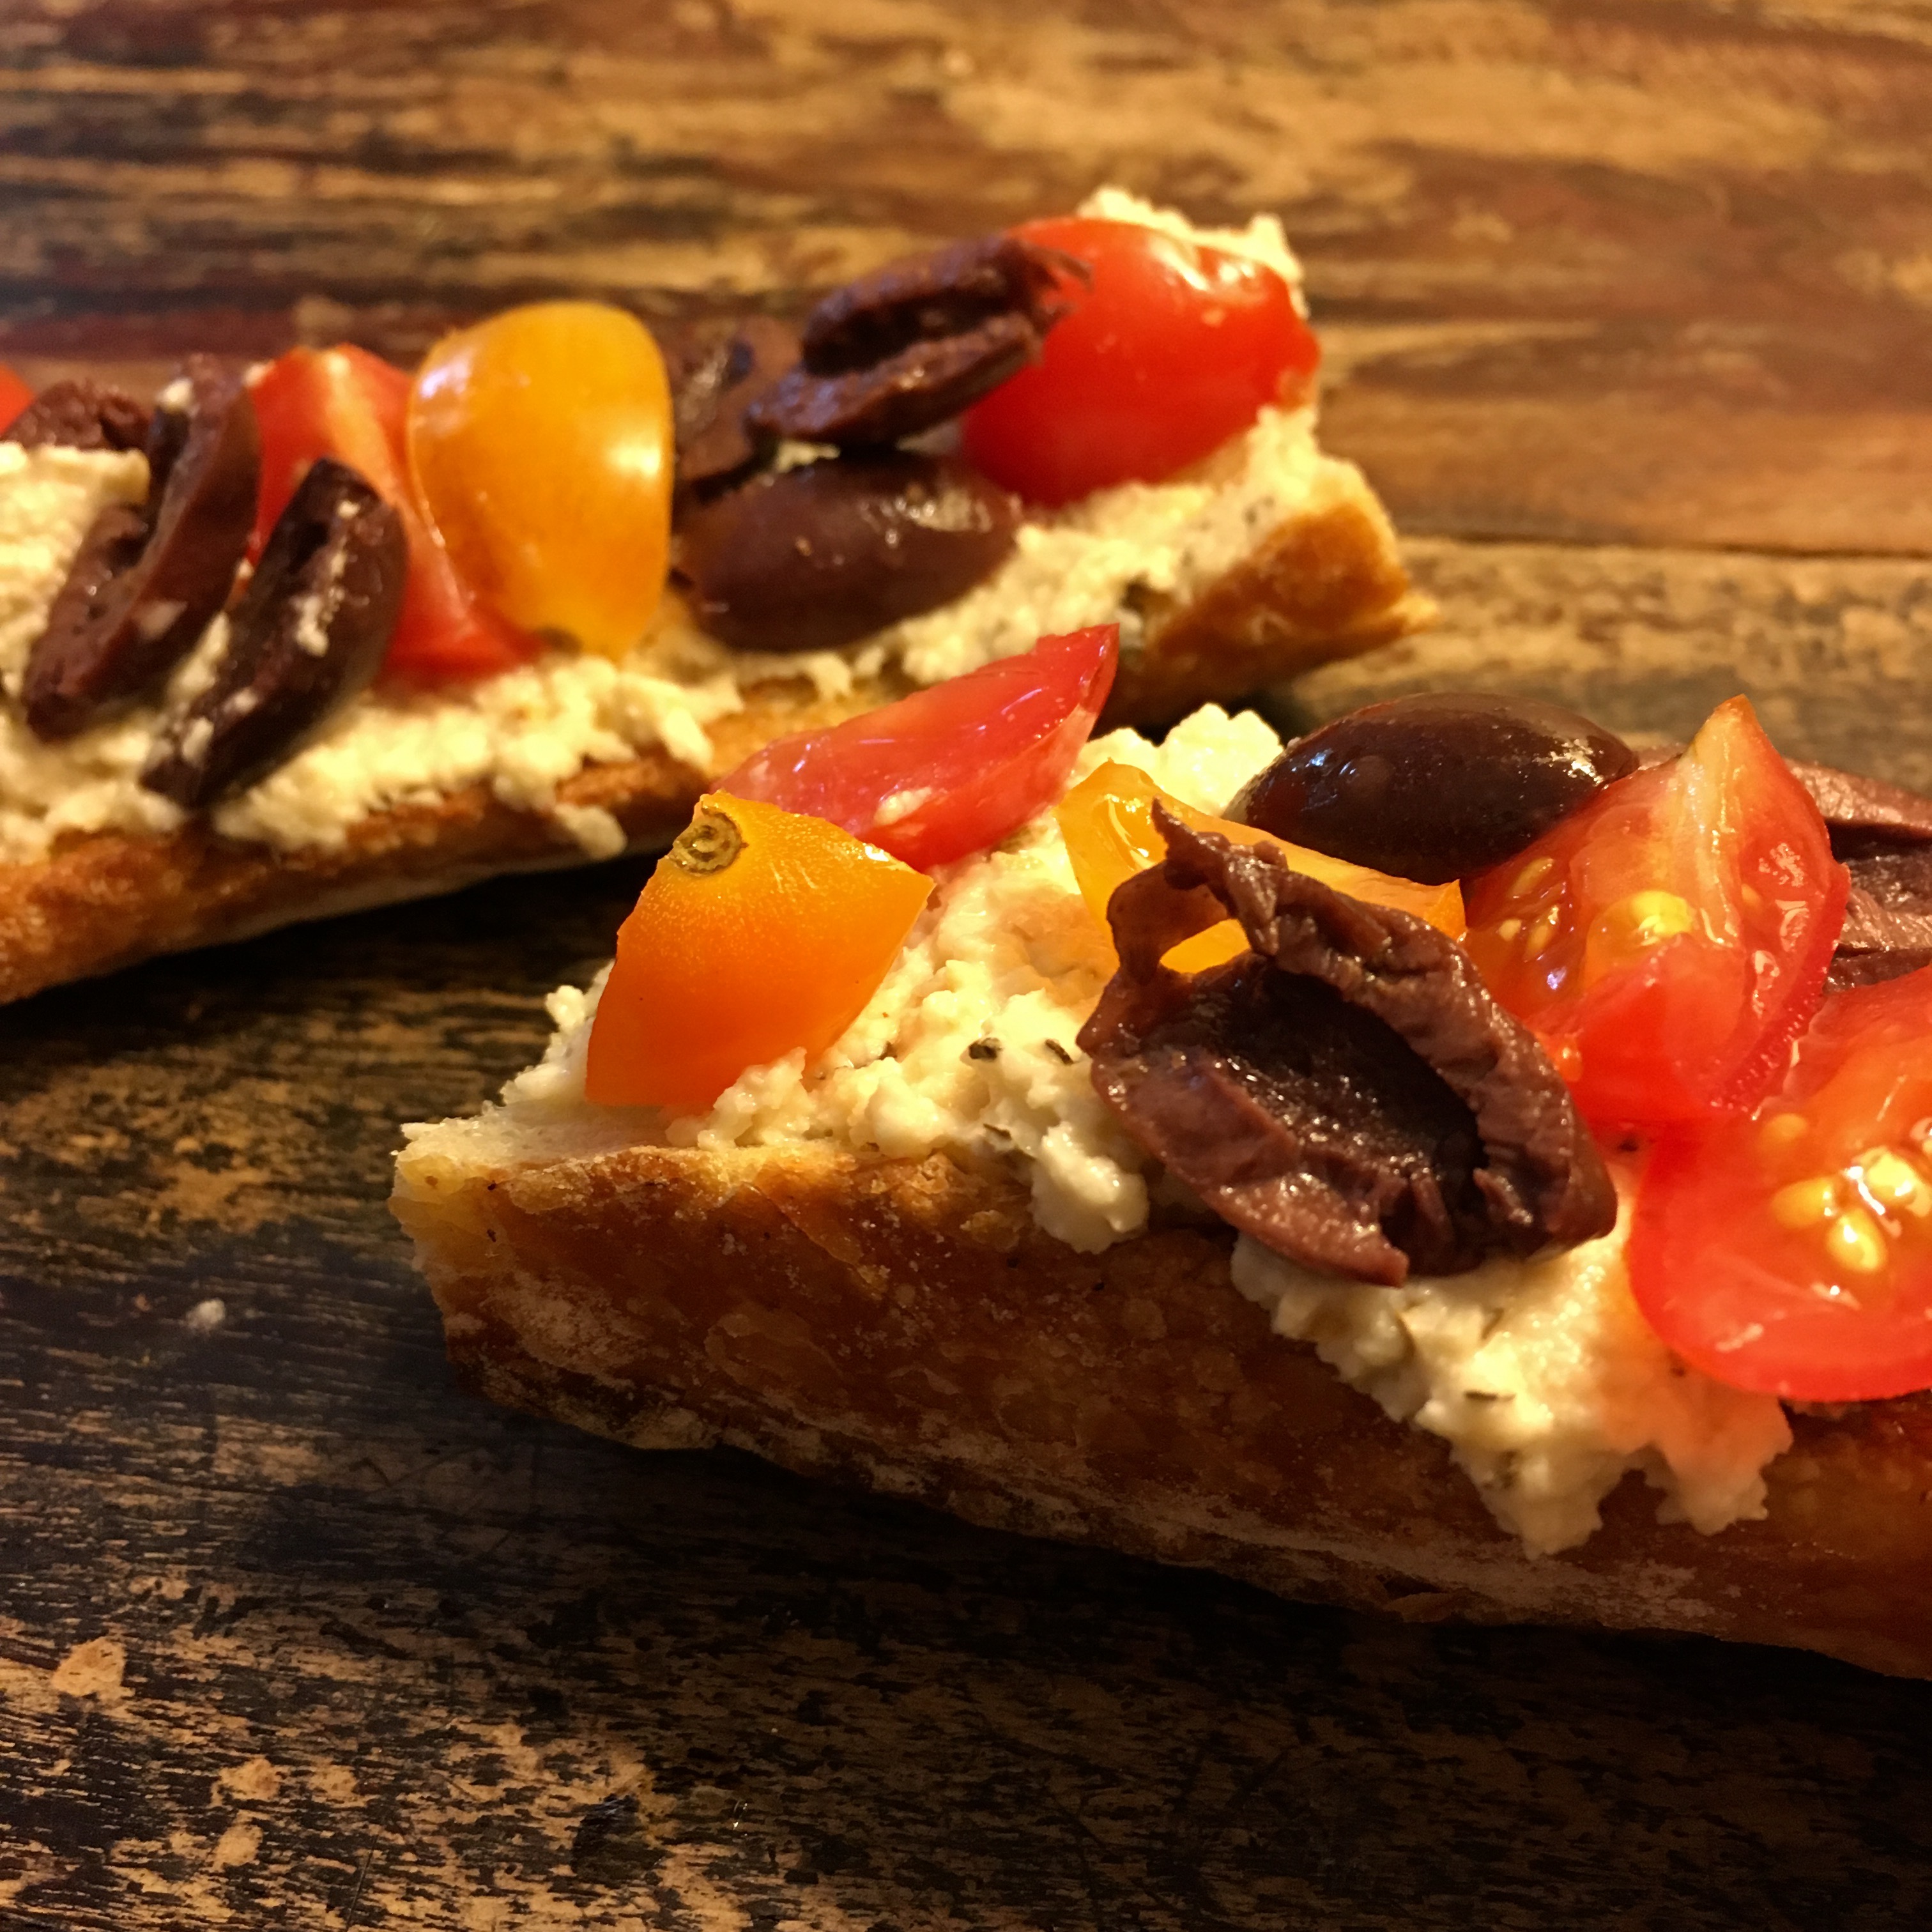 TOASTED BAGUETTE WITH HERBED CASHEW RICOTTA, OLIVES AND CHERRY TOMATOES - gluten-free option